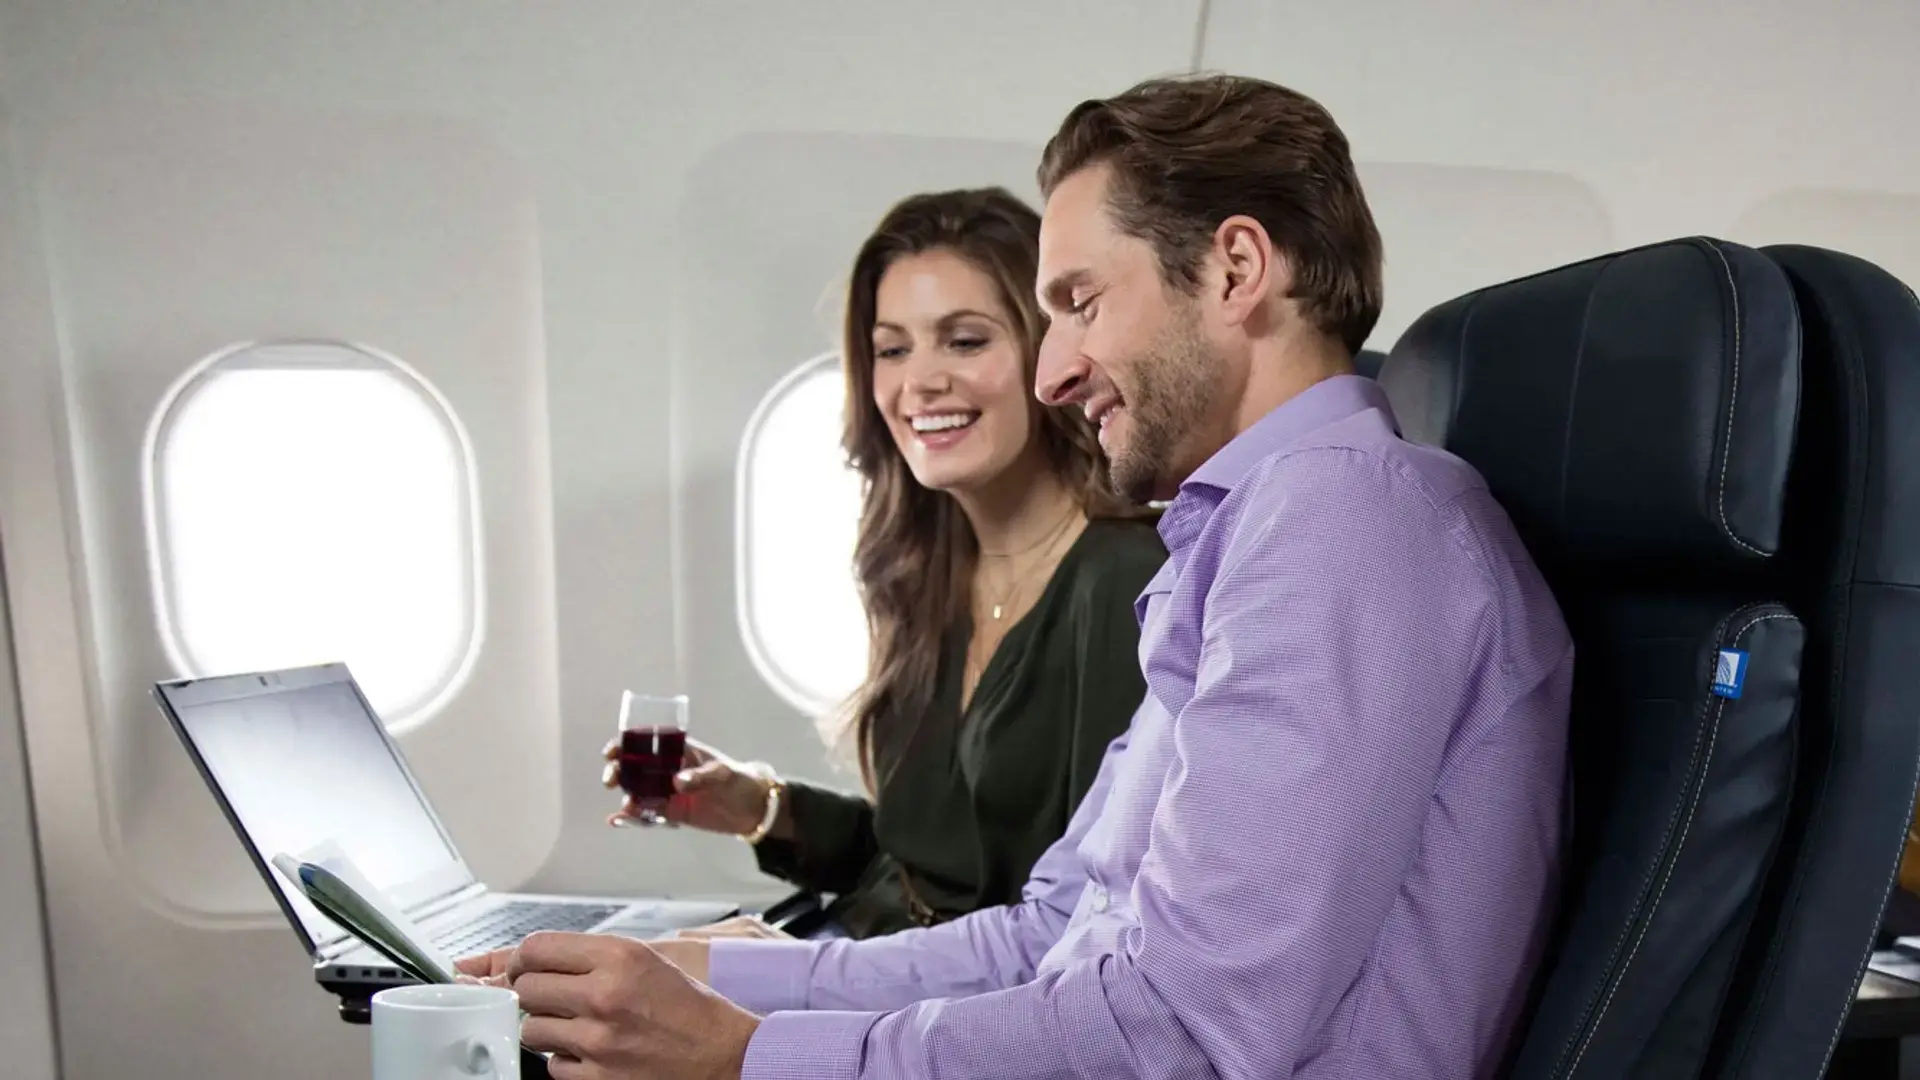 Airlines Articles - 11 Business Class Travel Tips to Help Make Your Experience Perfect!